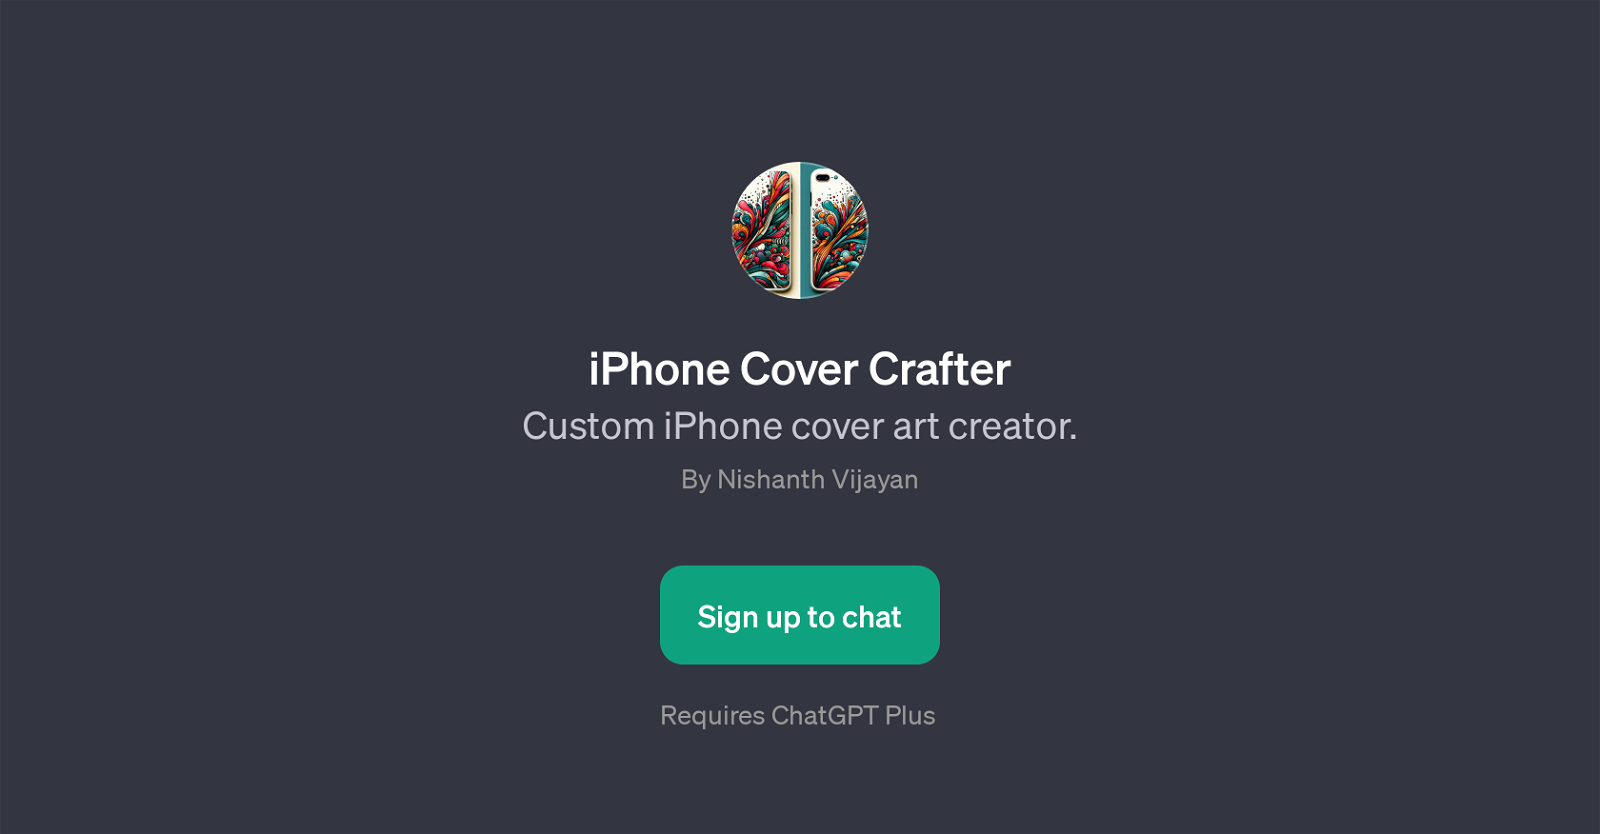 iPhone Cover Crafter website